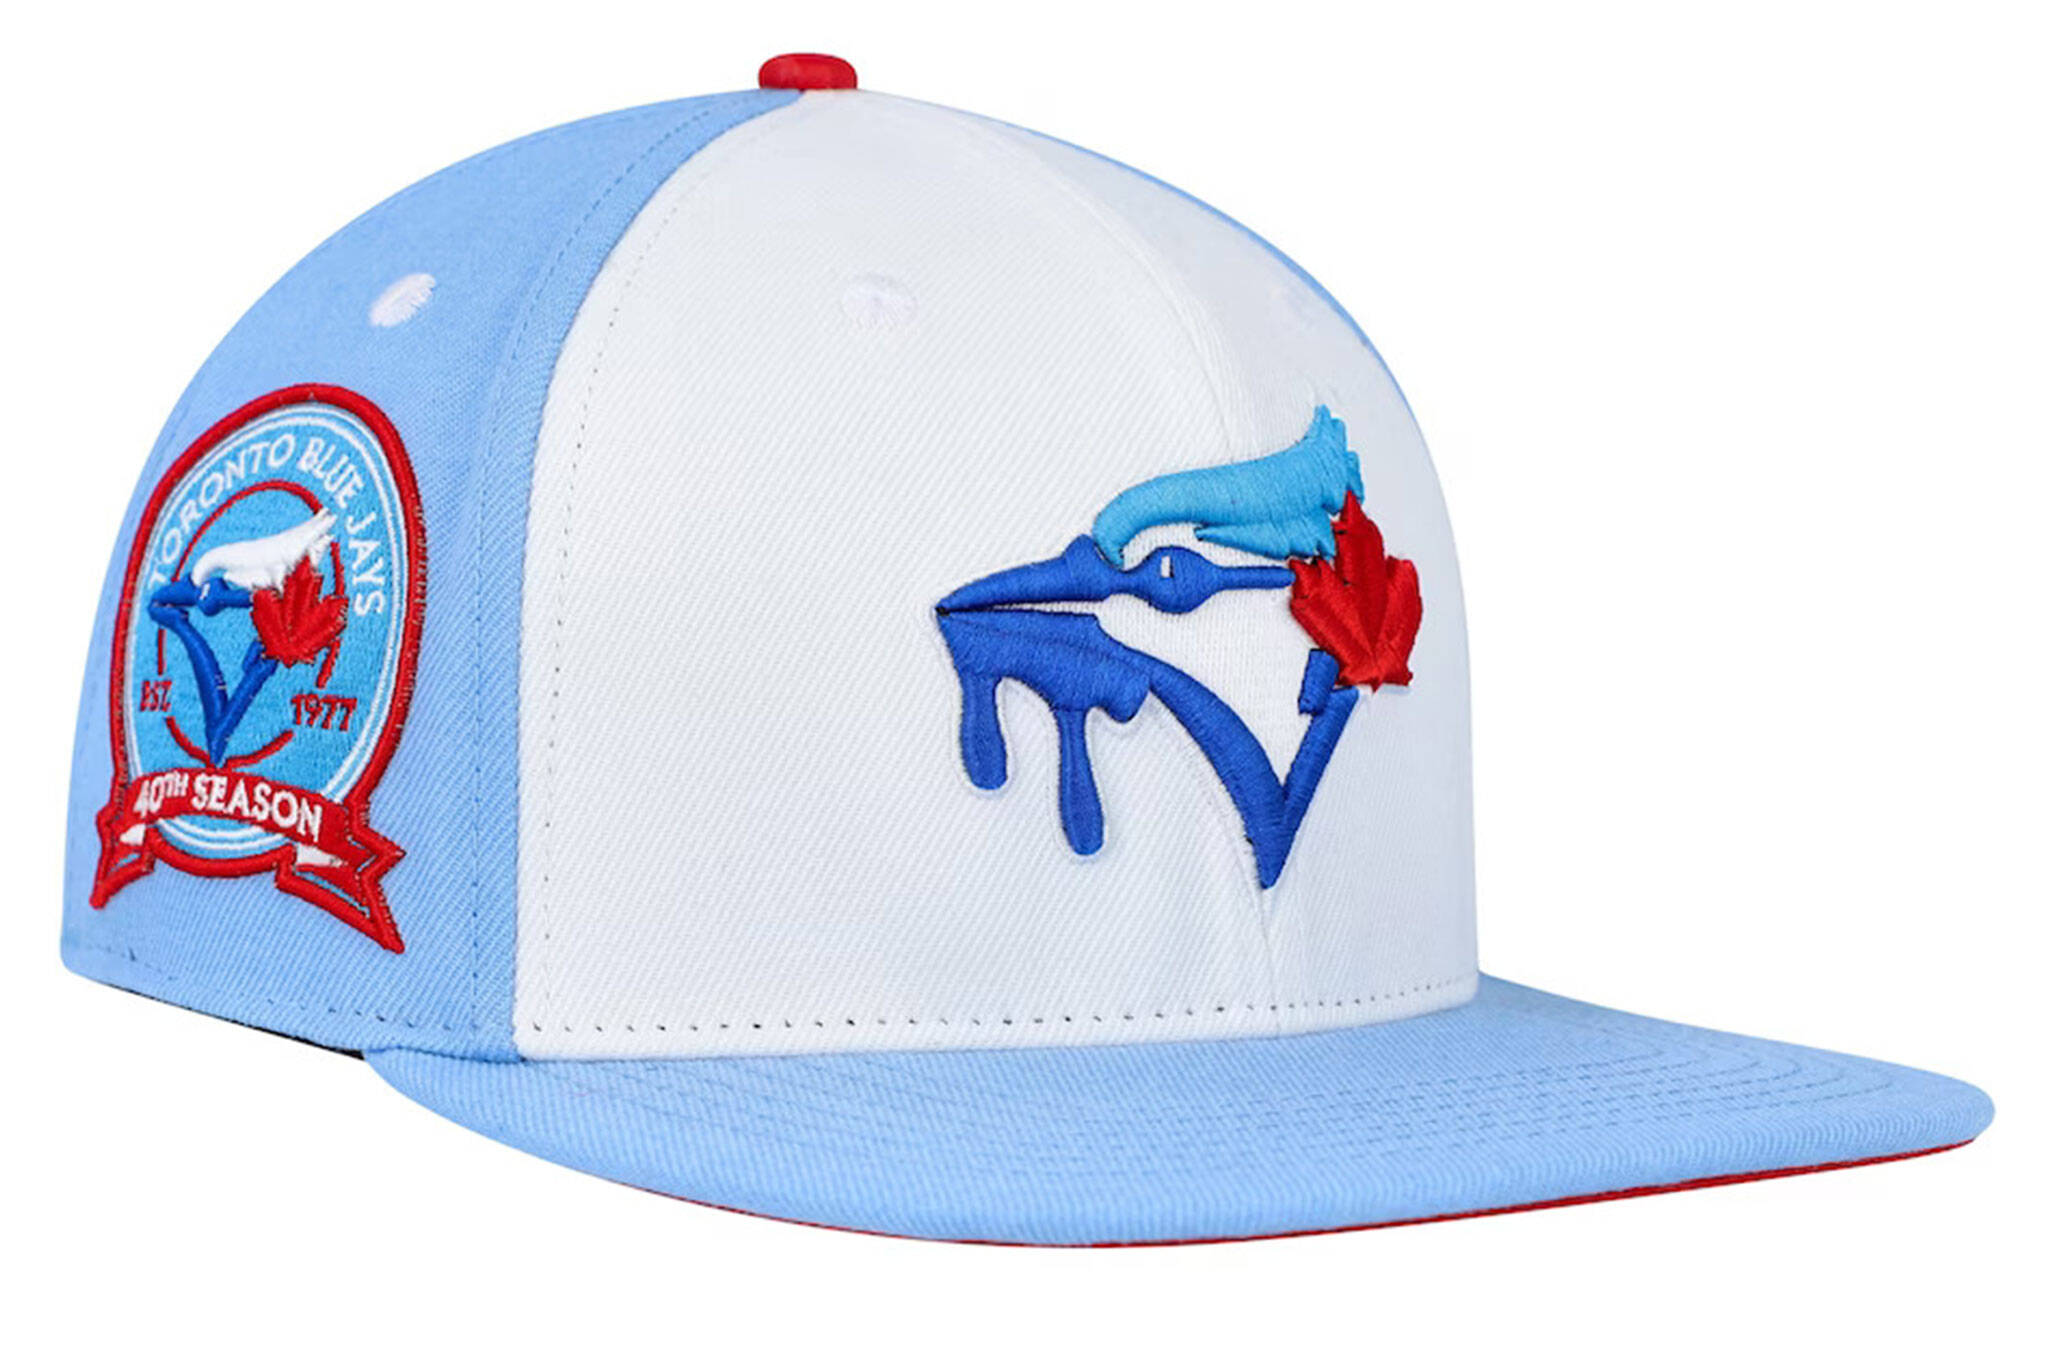 MLB releases Toronto Blue Jays hat with unidentifiable goop